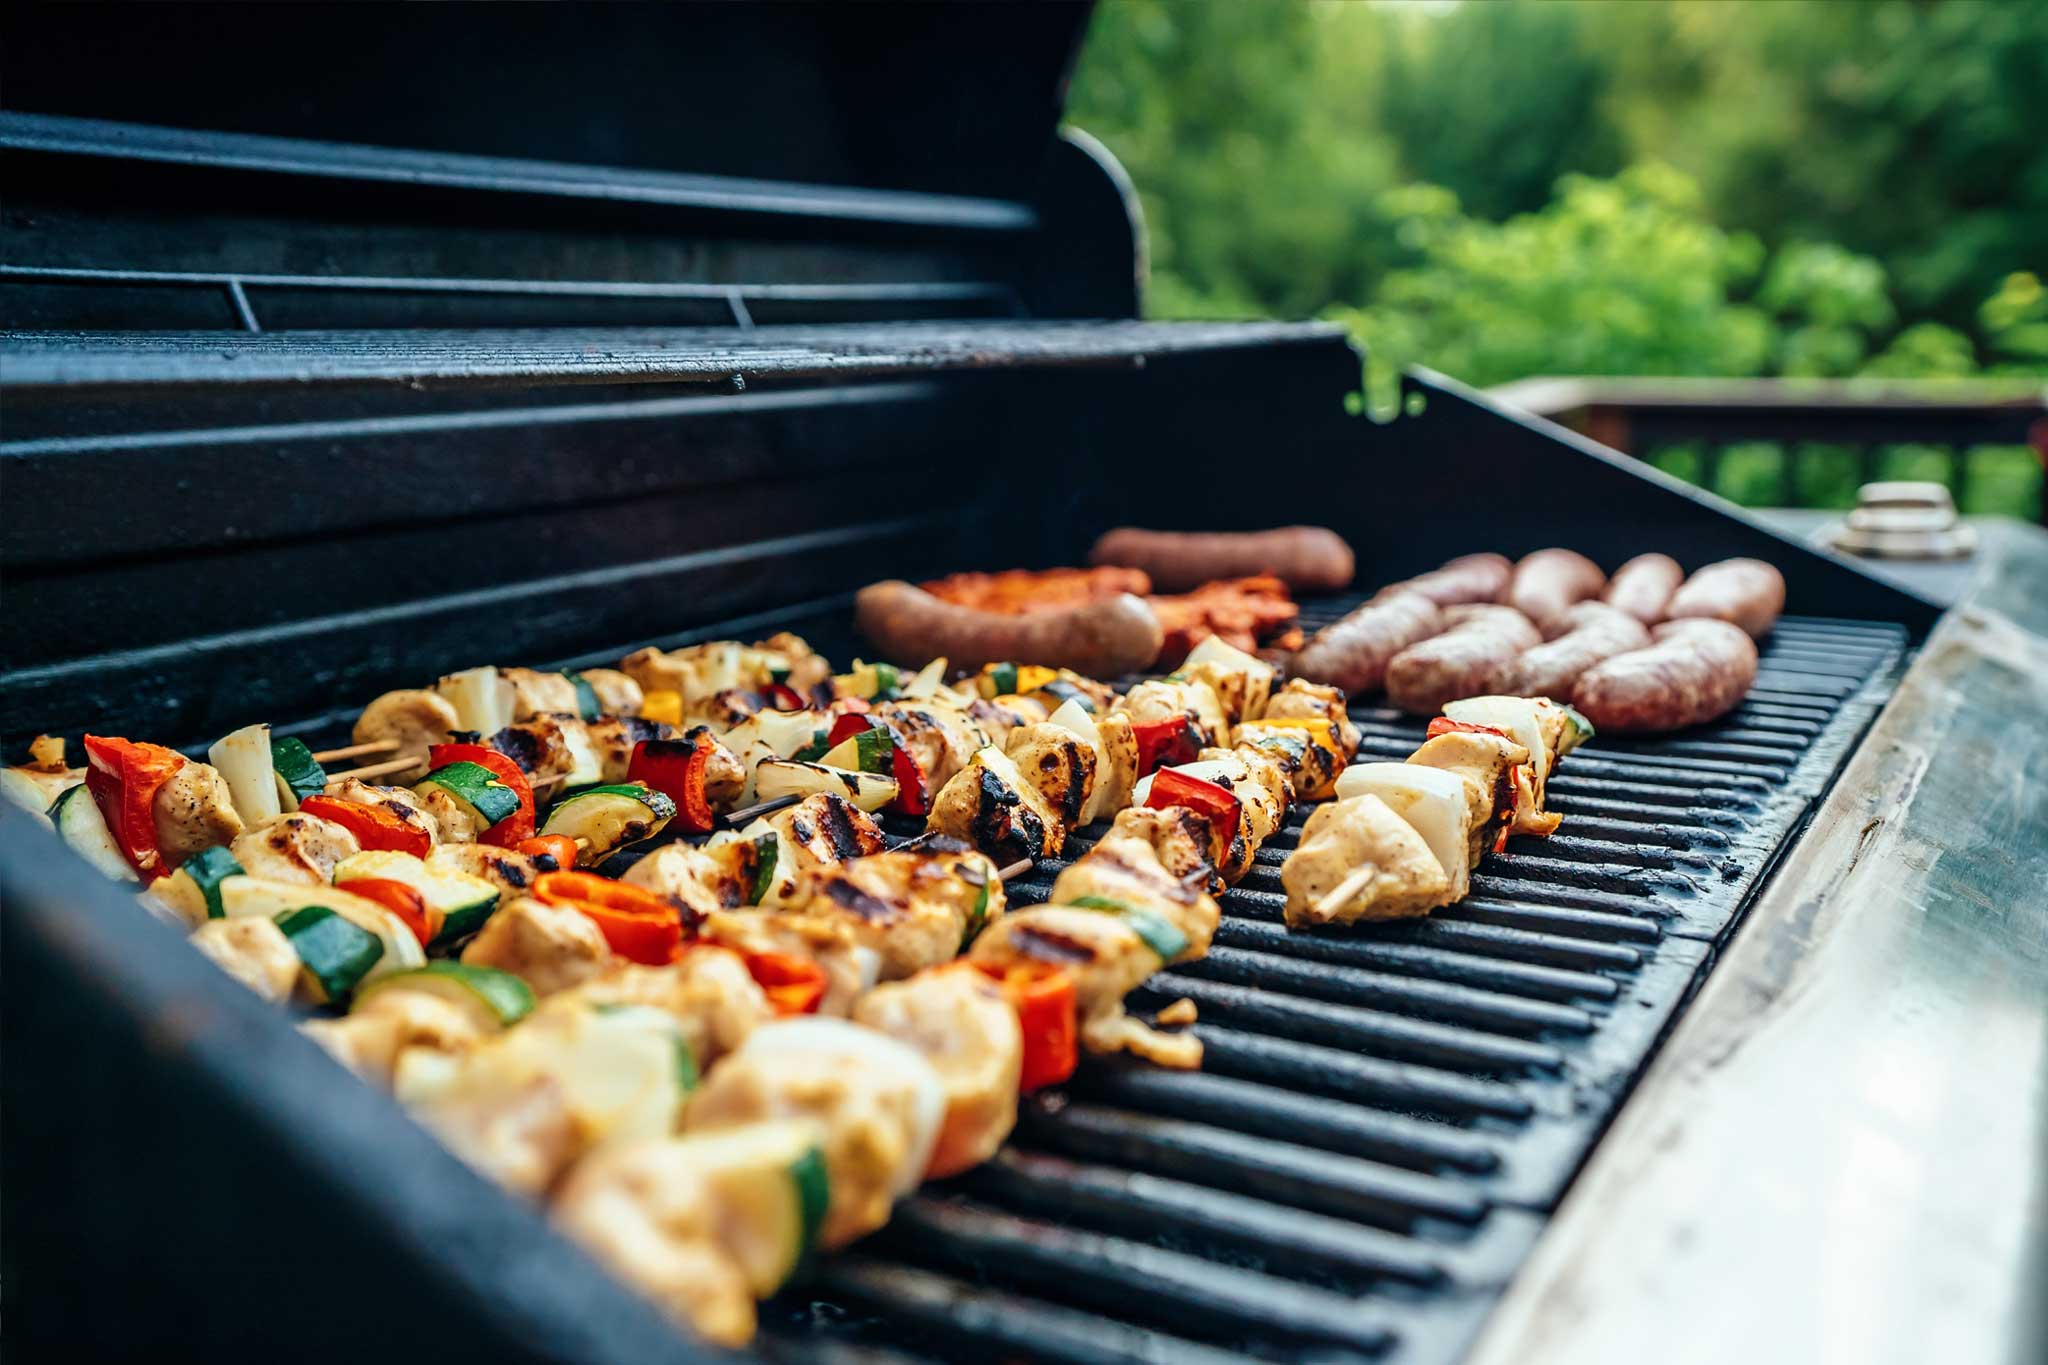 Your first evening meal will be included in your Stag Party package. We have a BBQ to use too!